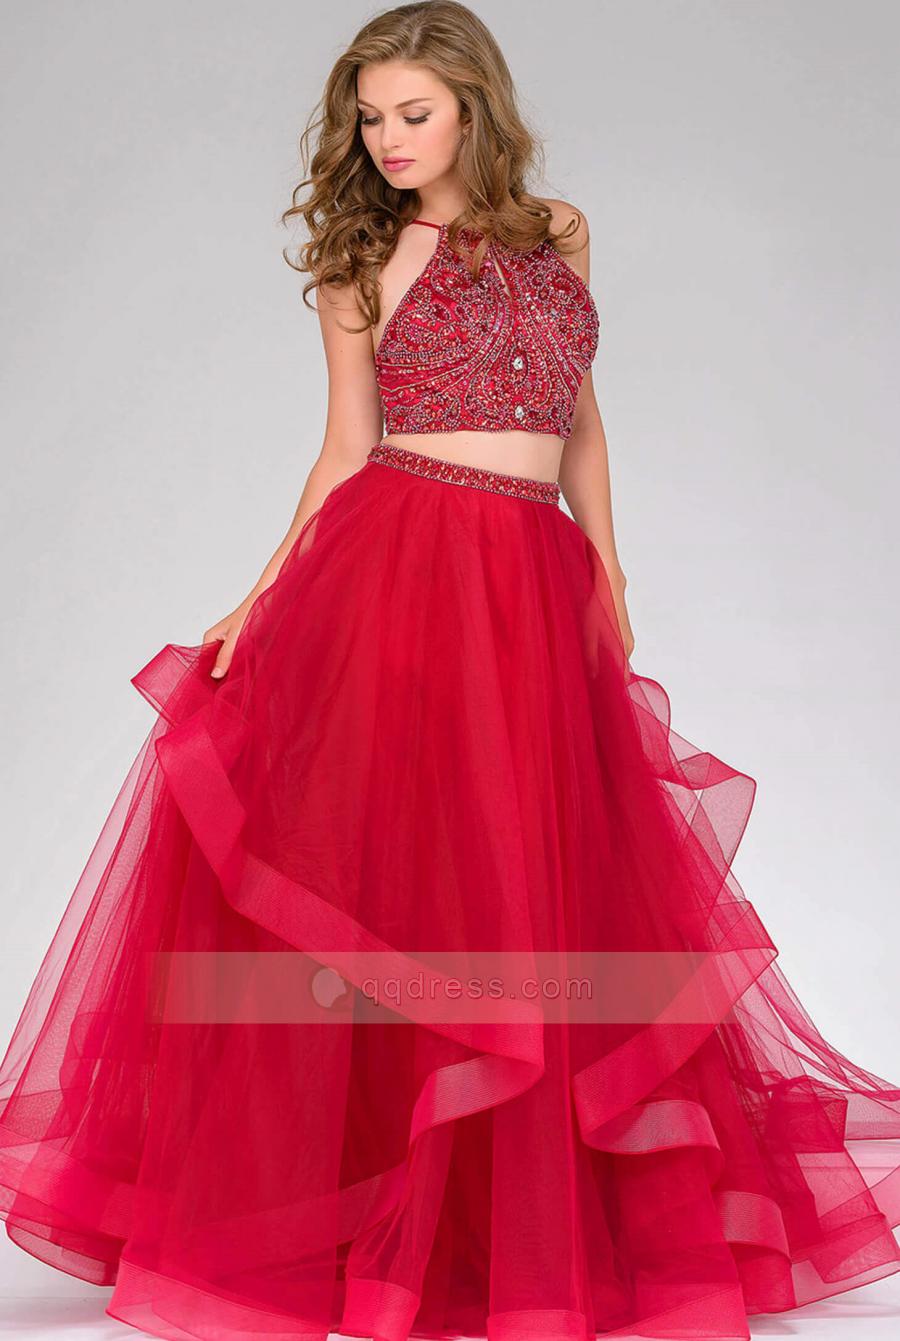 Wedding - A-line Halter Neck Two Piece Rhinestone Bodice Ruffled Tulle Prom Gown Sale Cheap